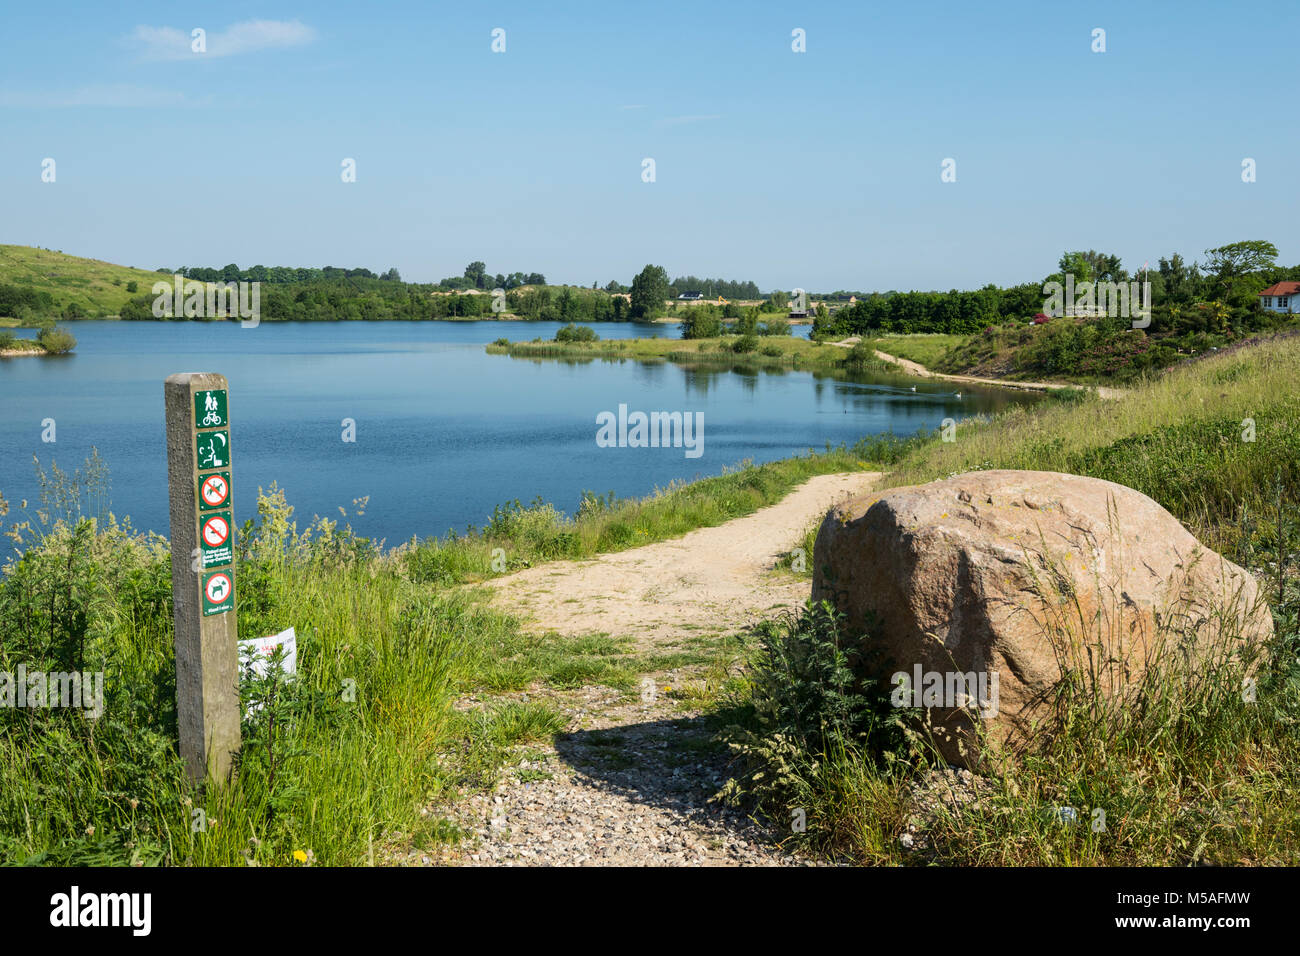 Landscape from natural areas in Tarup-Davinde at Odense, Establishment of nature in ready dug open pit areas. Stock Photo